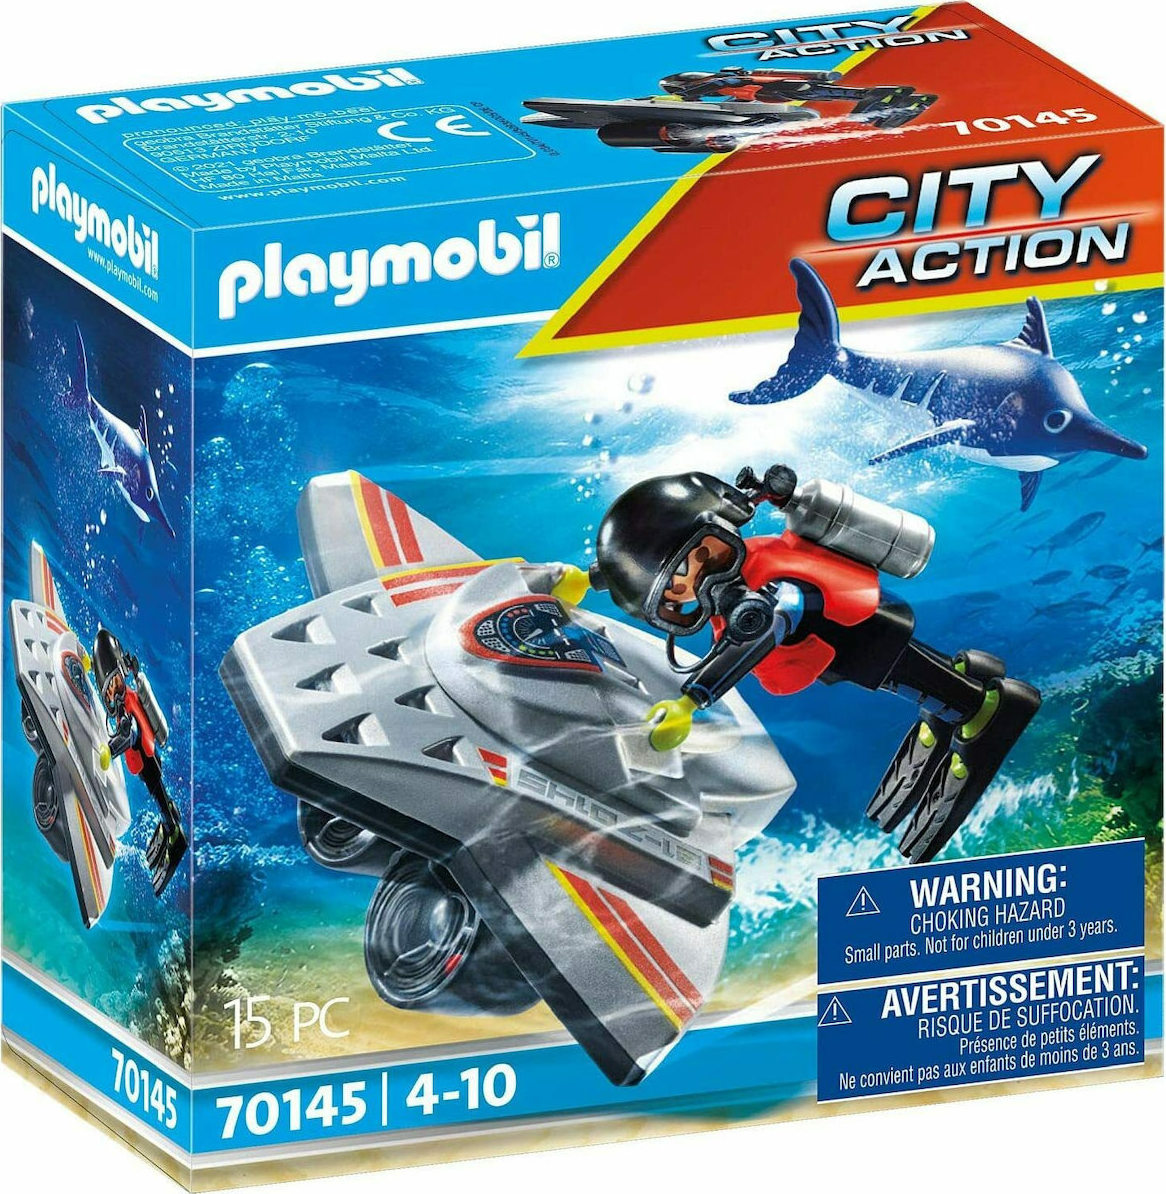 Playmobil City Action: Diving Scooter in Rescue 70145